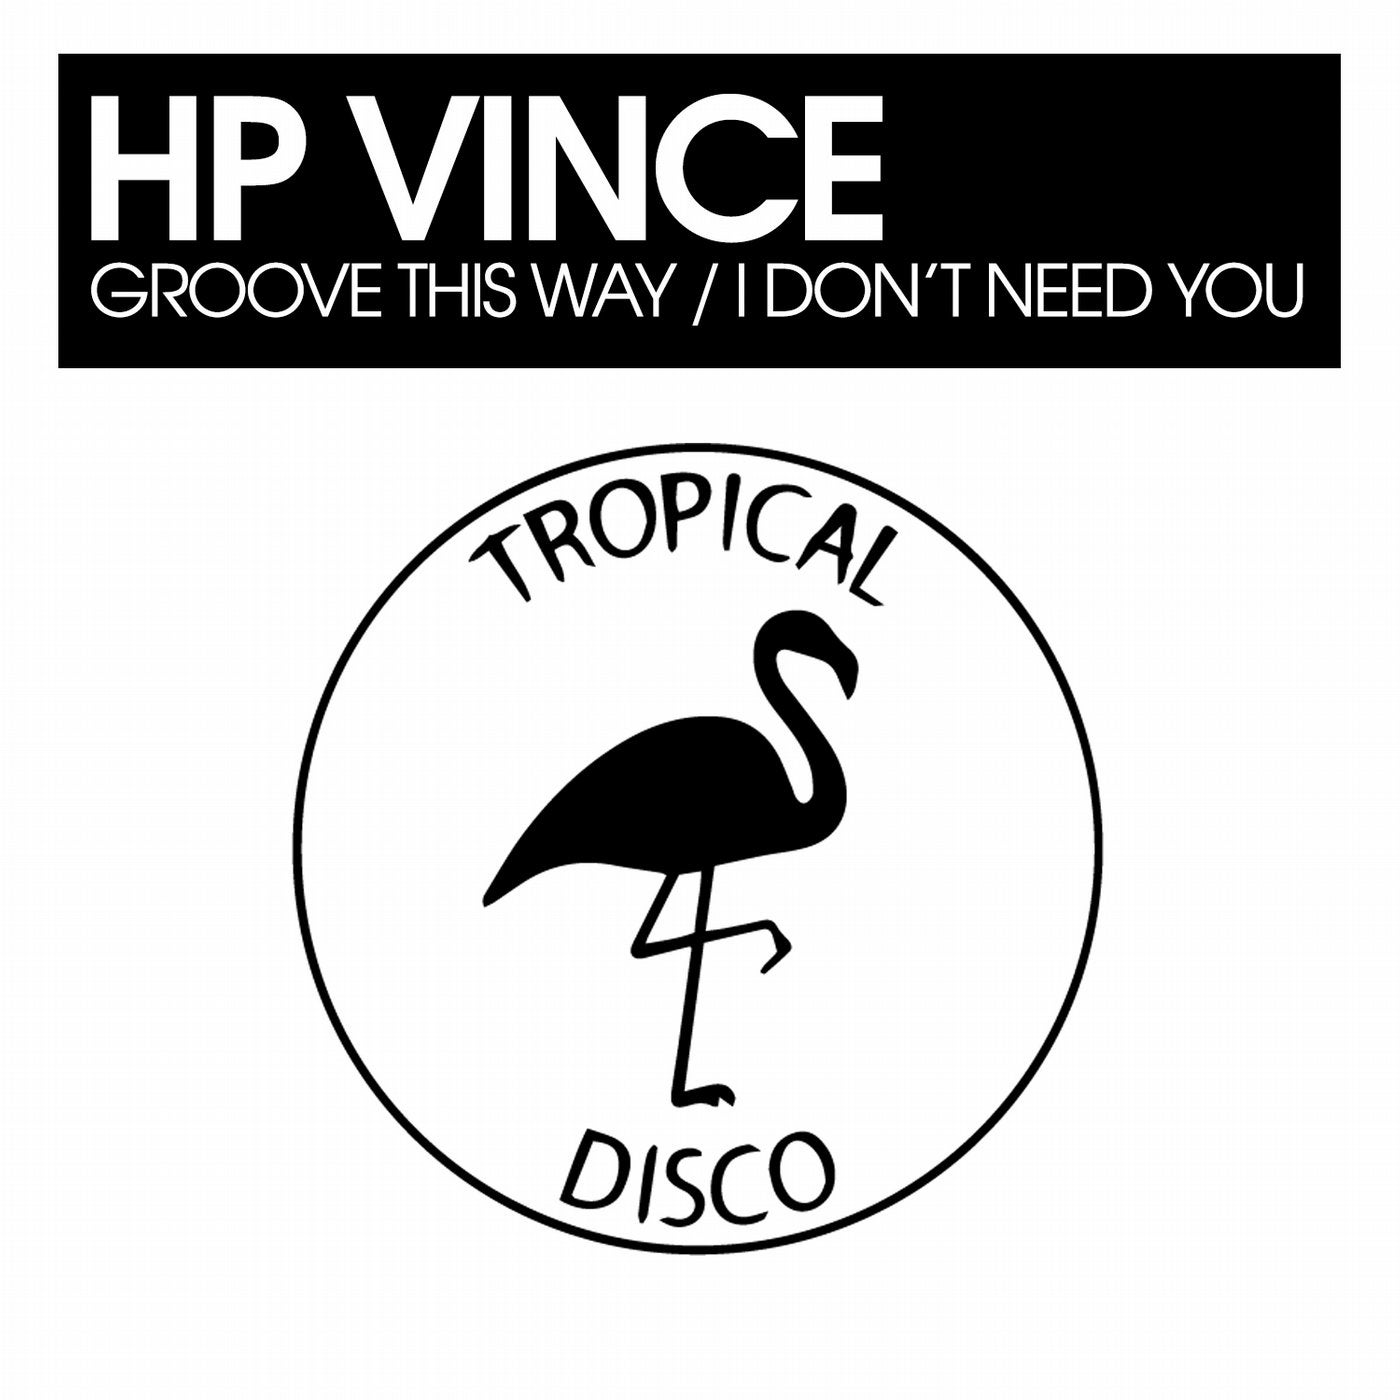 Groove This Way / I Don't Need You